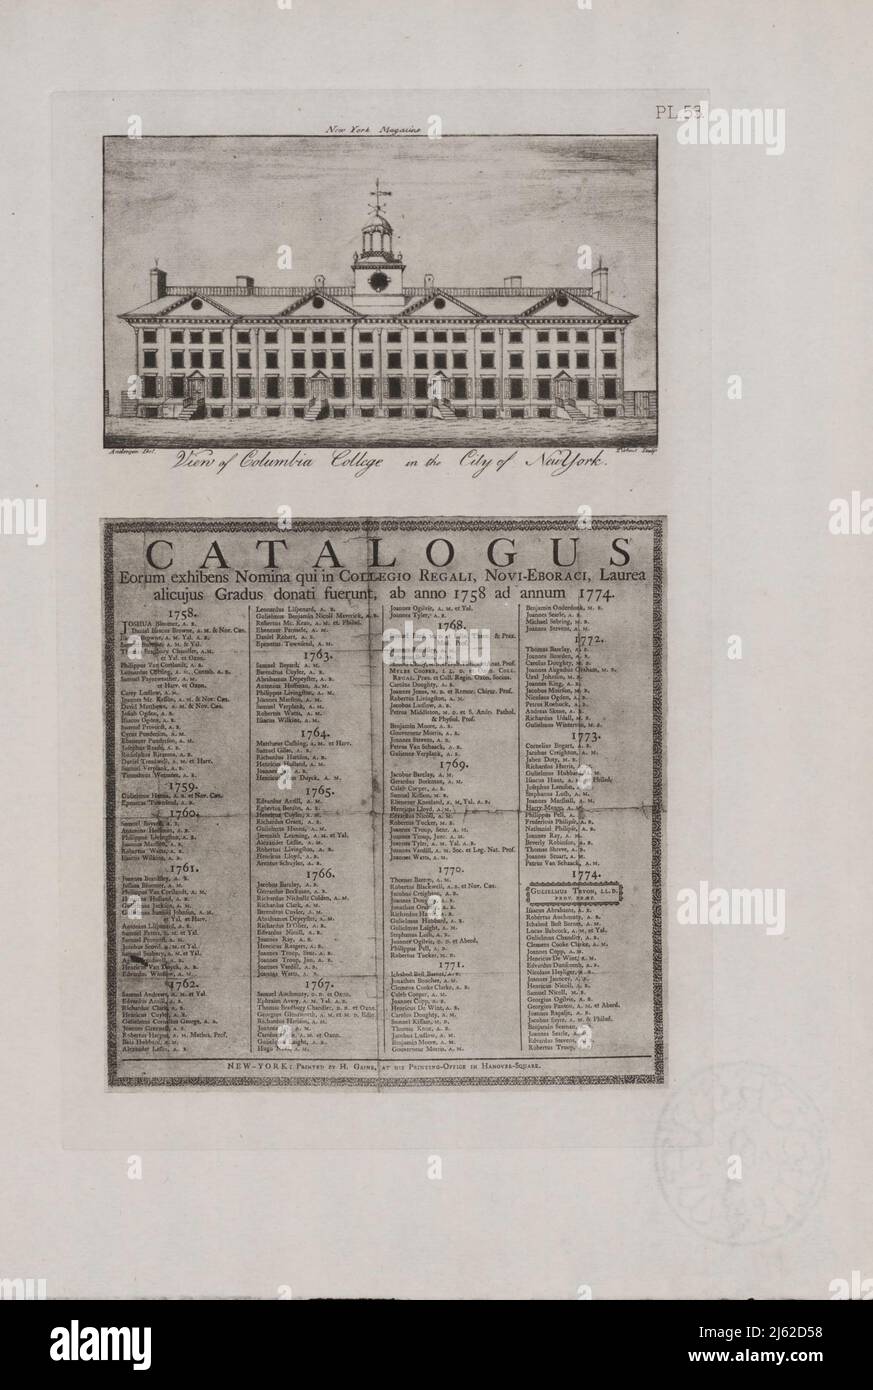 View of Columbia College in the City of New York c. 1790 (top) First Catalogue of King’s College (bottom) The period of discovery (1524-1609); the Dutch period (1609-1664). The English period (1664-1763). The Revolutionary period (1763-1783). Period of adjustment and reconstruction; New York as the state and federal capital (1783-1811) from  The iconography of Manhattan Island, 1498-1909 compiled from original sources and illustrated by photo-intaglio reproductions of important maps, plans, views, and documents in public and private collections - Volume 1 by Stokes, I. N. Phelps (Isaac Newton Stock Photo